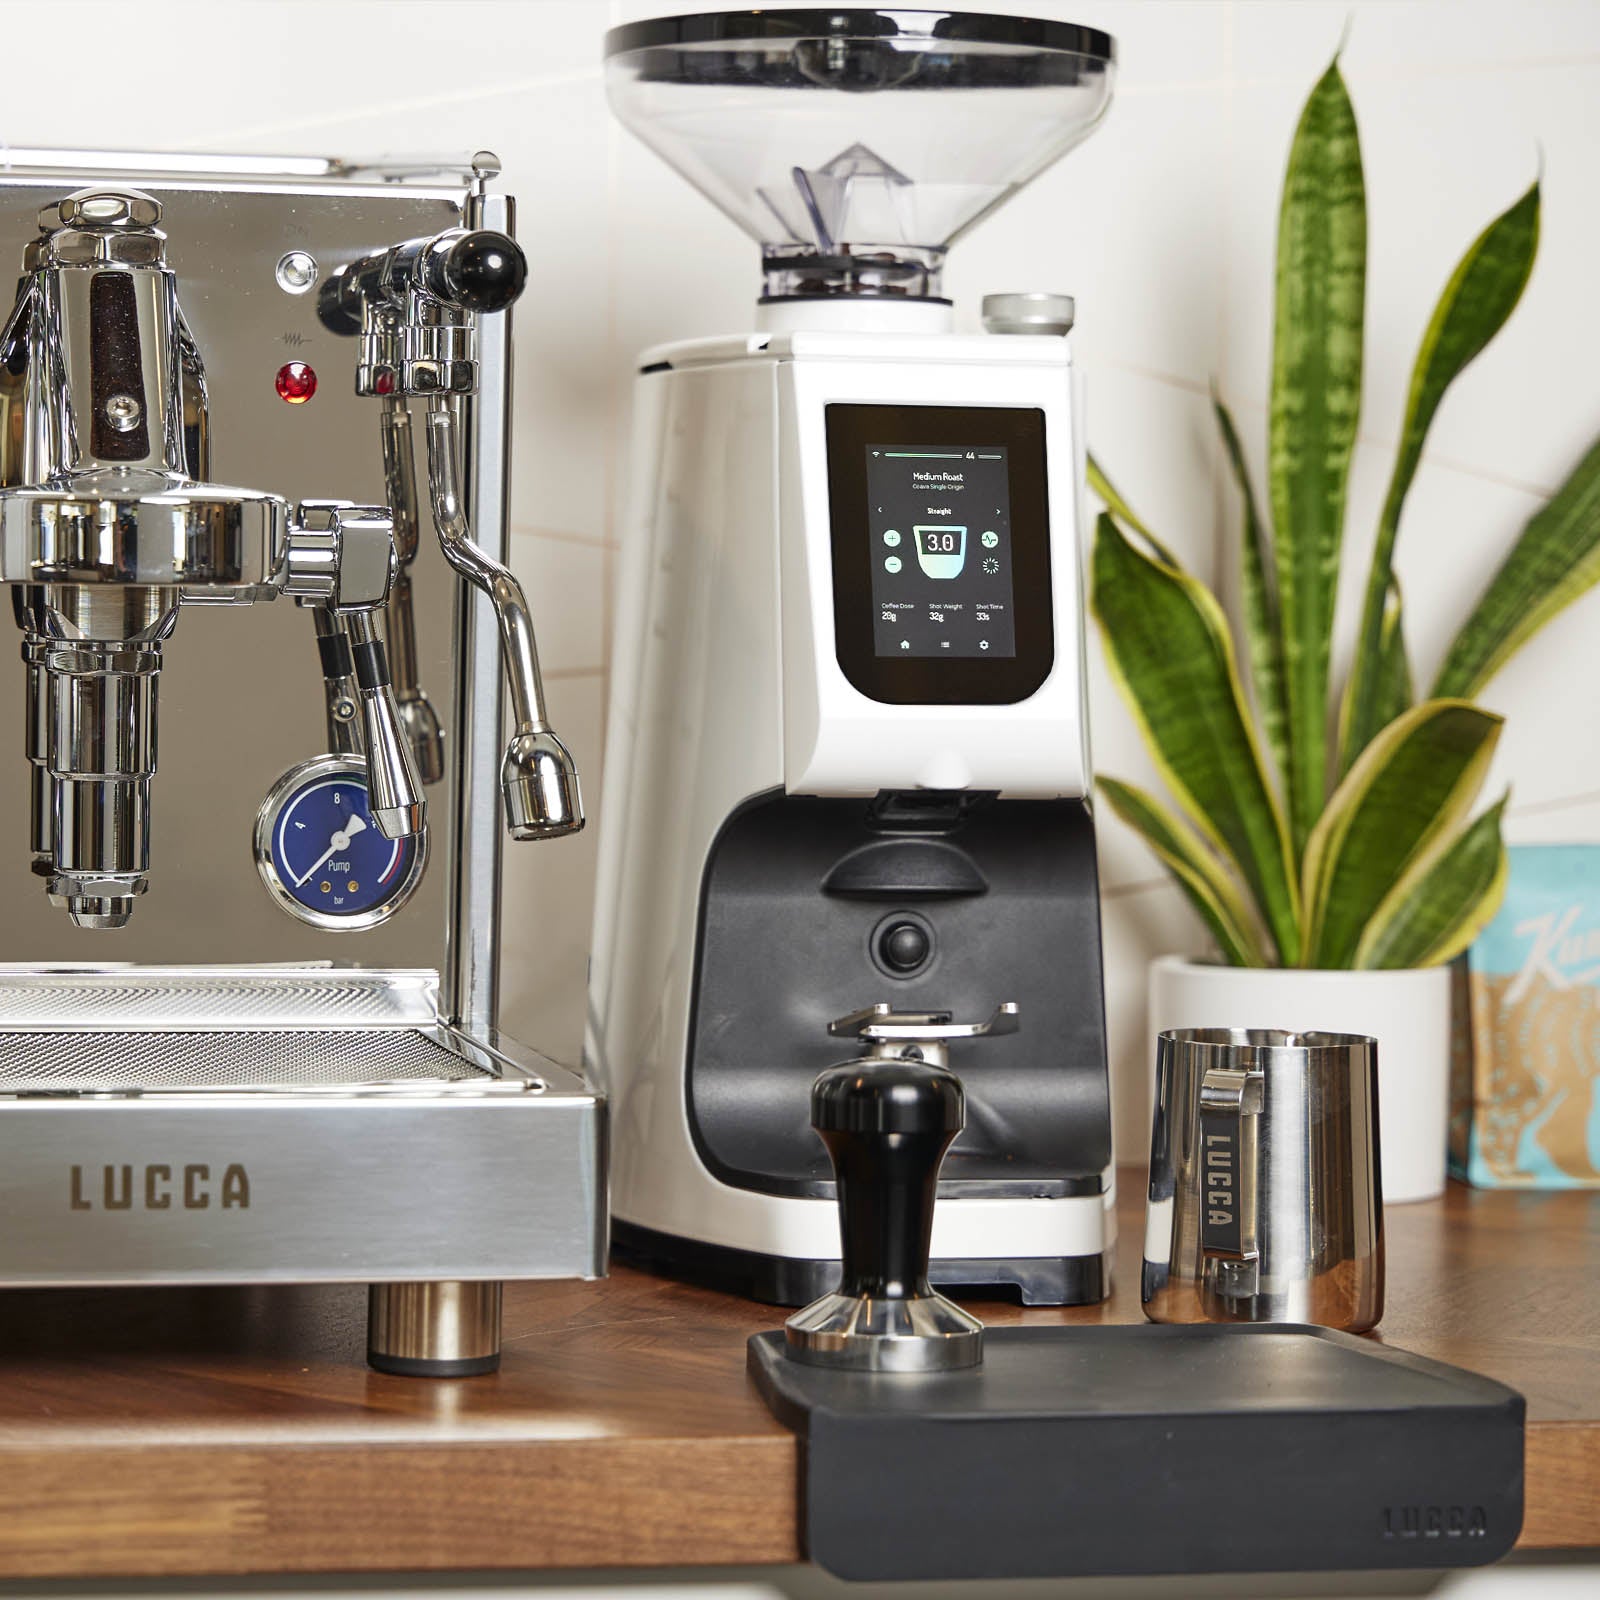 LUCCA Corner Tamping Mat, LUCCA Atom 75 Espresso Grinder, LUCCA Tamper, LUCCA Steaming Pitcher, Clive Coffee, lifestyle